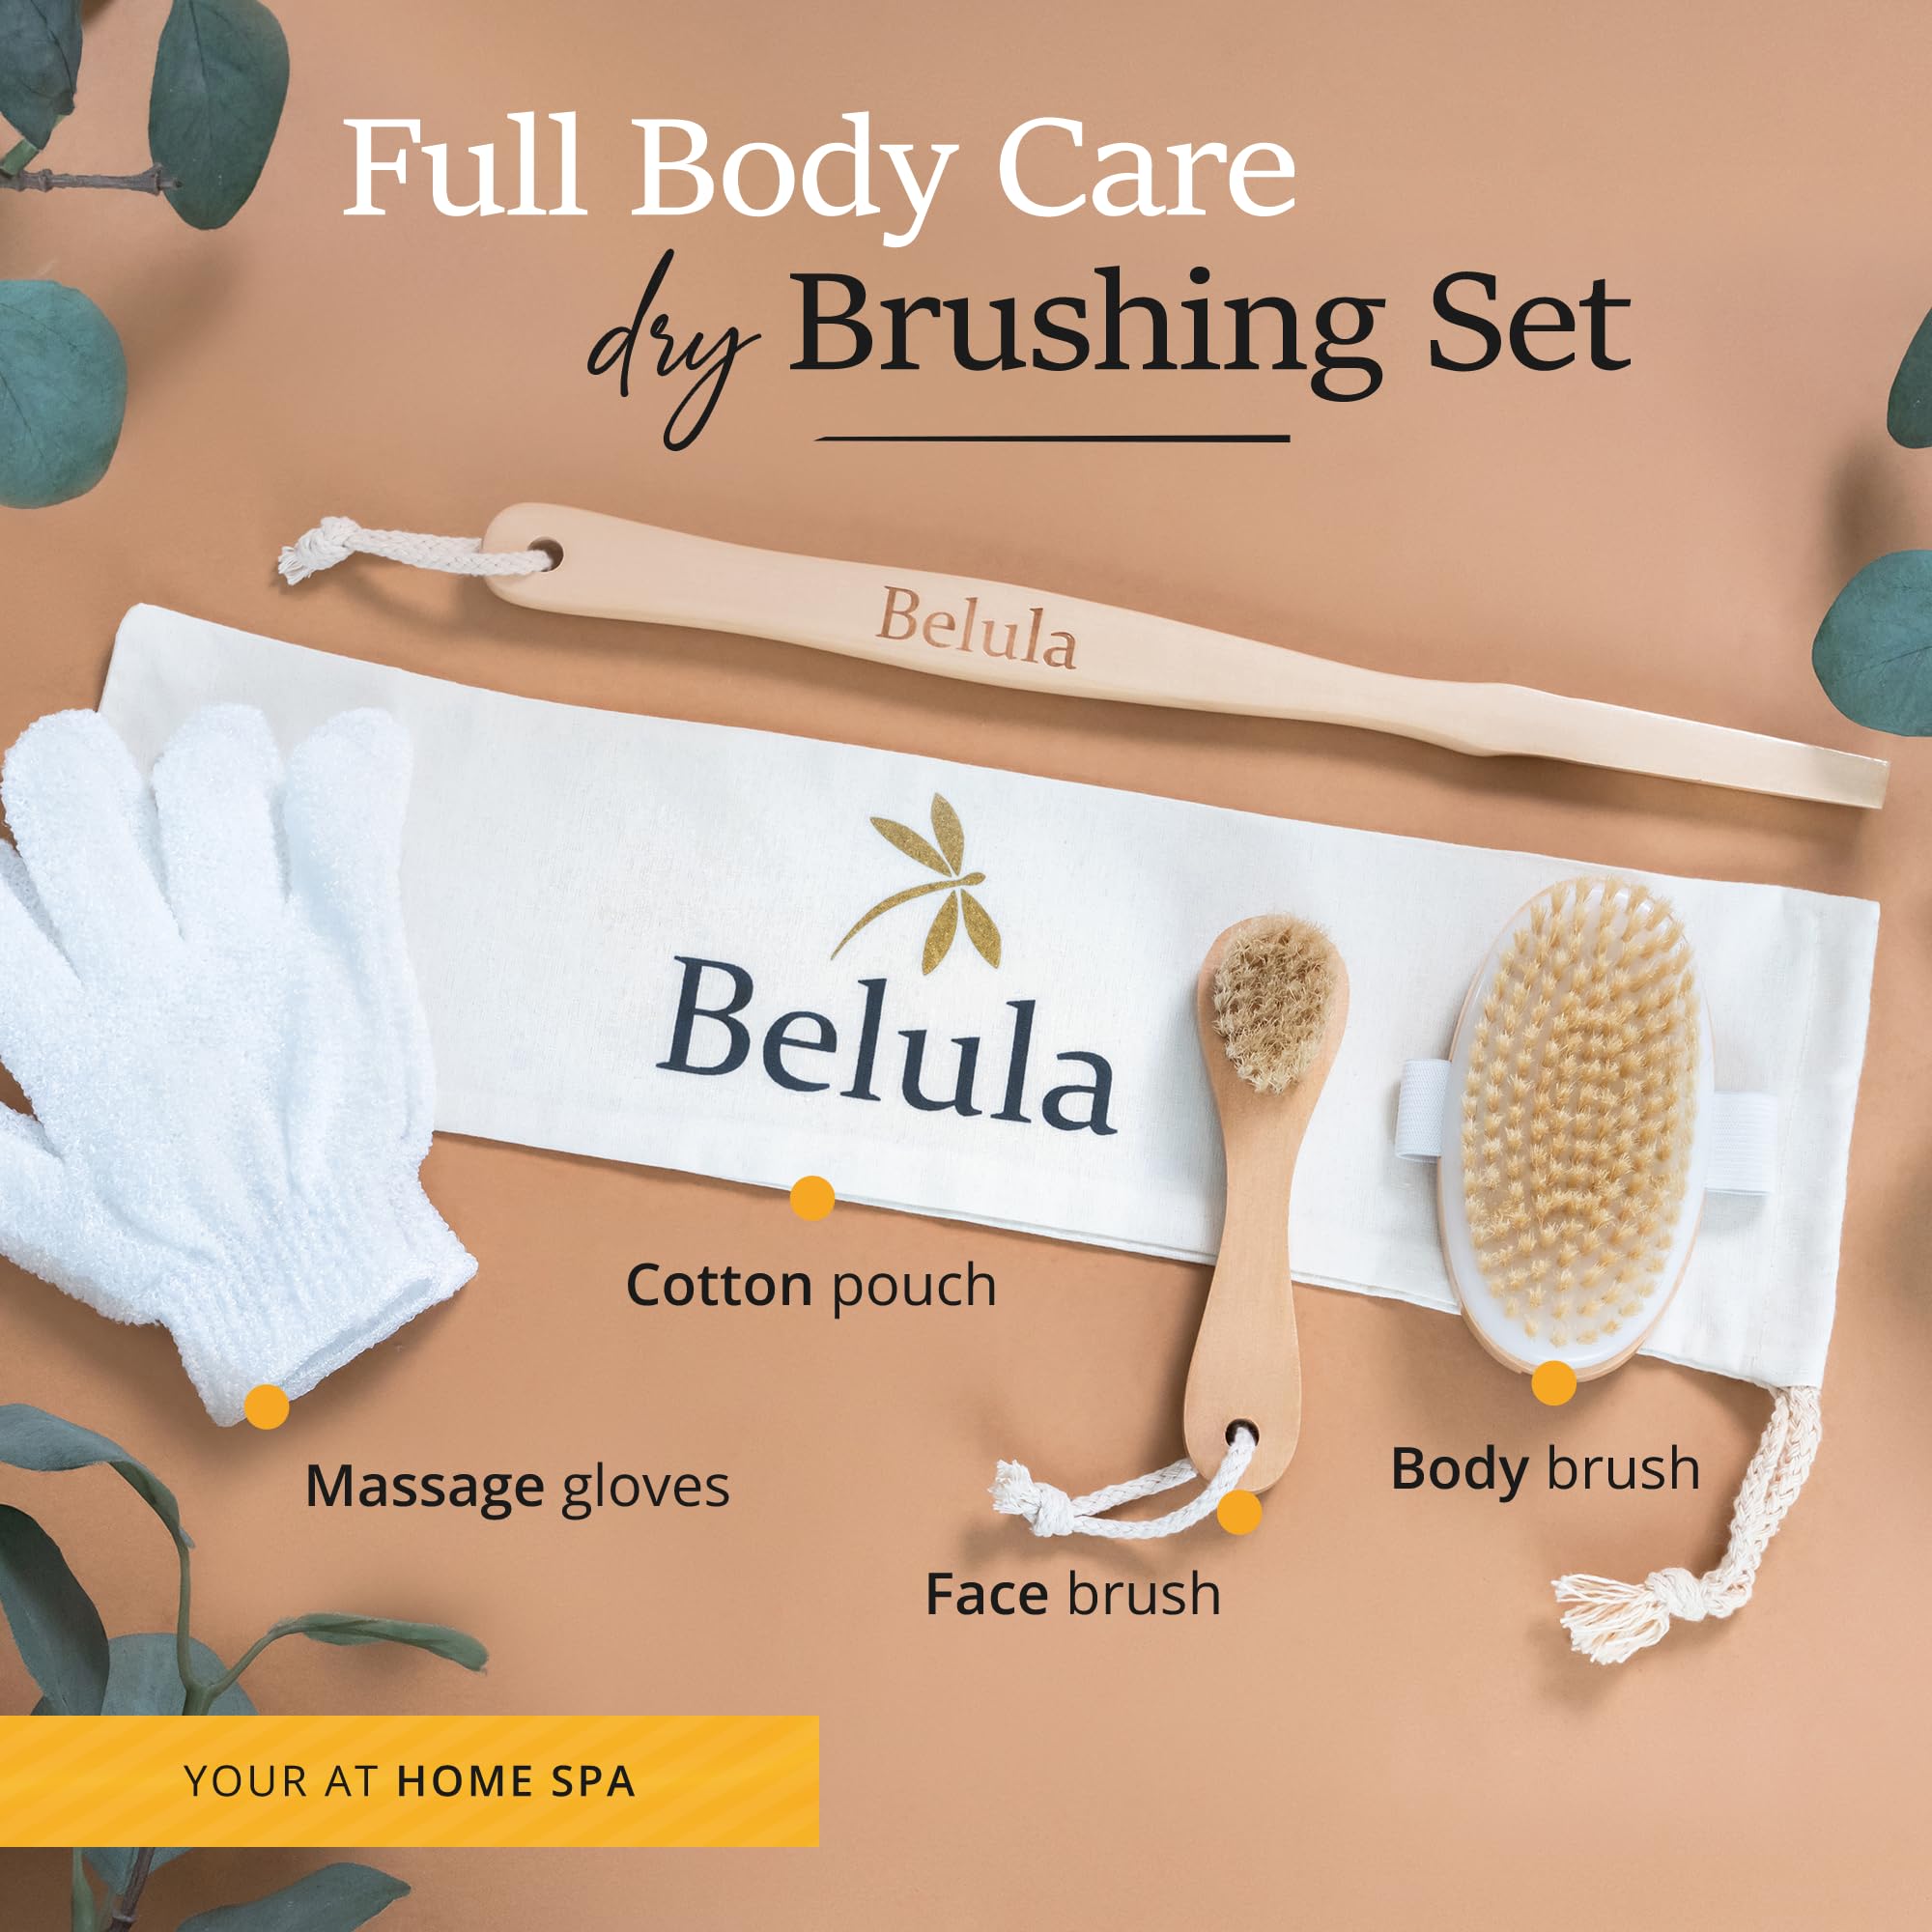 Belula Premium Dry Brushing Body Brush Set- Natural Boar Bristle Body Brush, Exfoliating Face Brush & One Pair Bath & Shower Gloves. Free Bag & How To – Great Gift For A Glowing Skin & Healthy Body